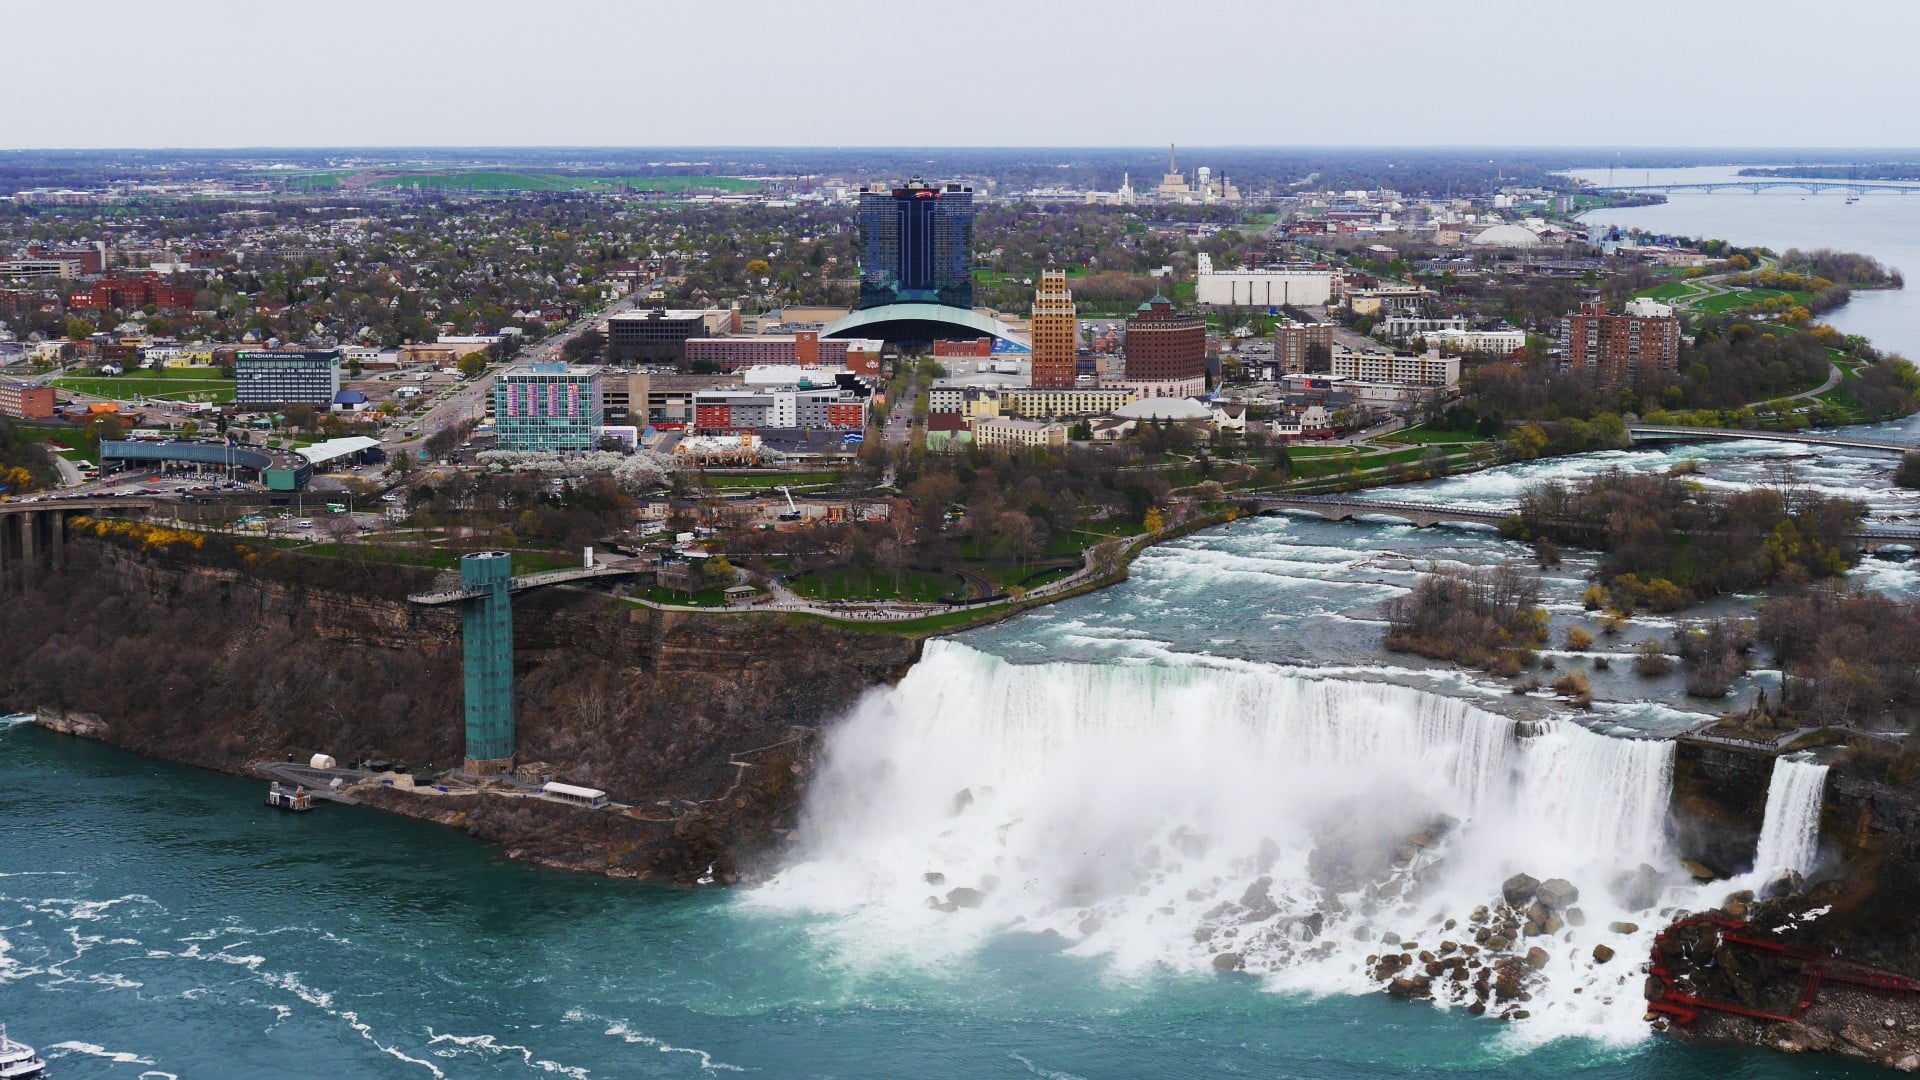 While the Canadian side offers the best views of the falls, Niagara Falls, NY is also a great place to stay in the area